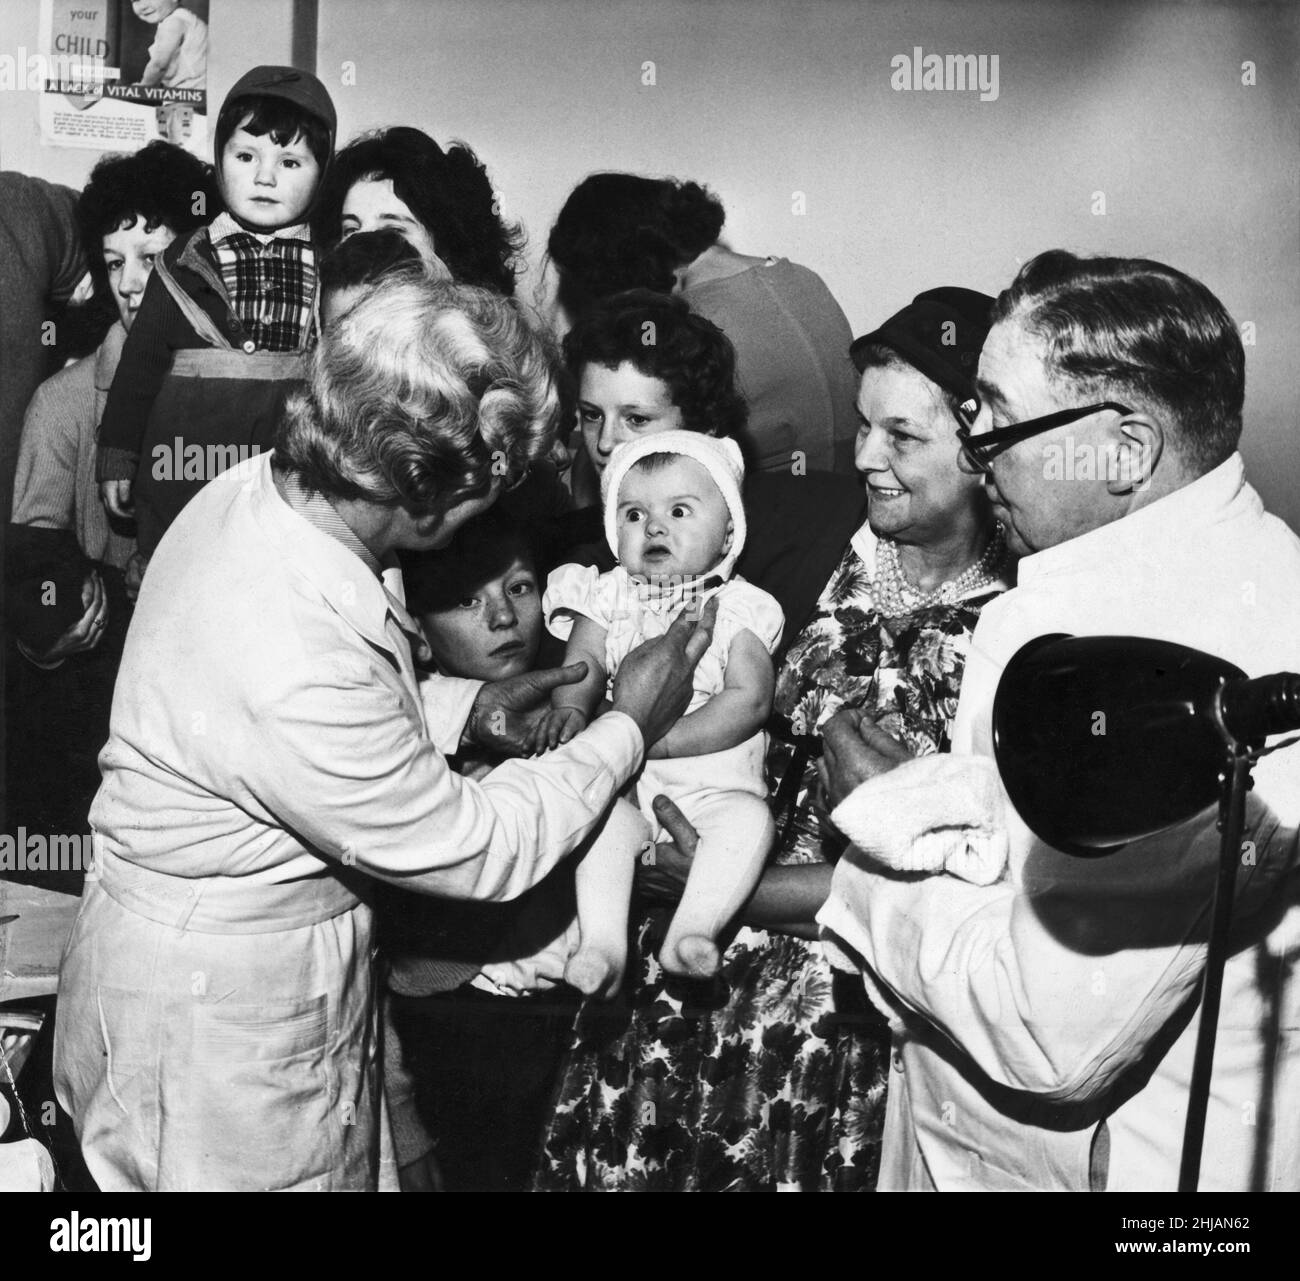 A baby being vaccinated at Halton Road divisional health centre in Runcorn, looking dismayed by quickly reassured by the nurse. More than 500 people visited the clinic to dat for their smallpox vaccination following the recent outbreak.29th January 1962. Stock Photo